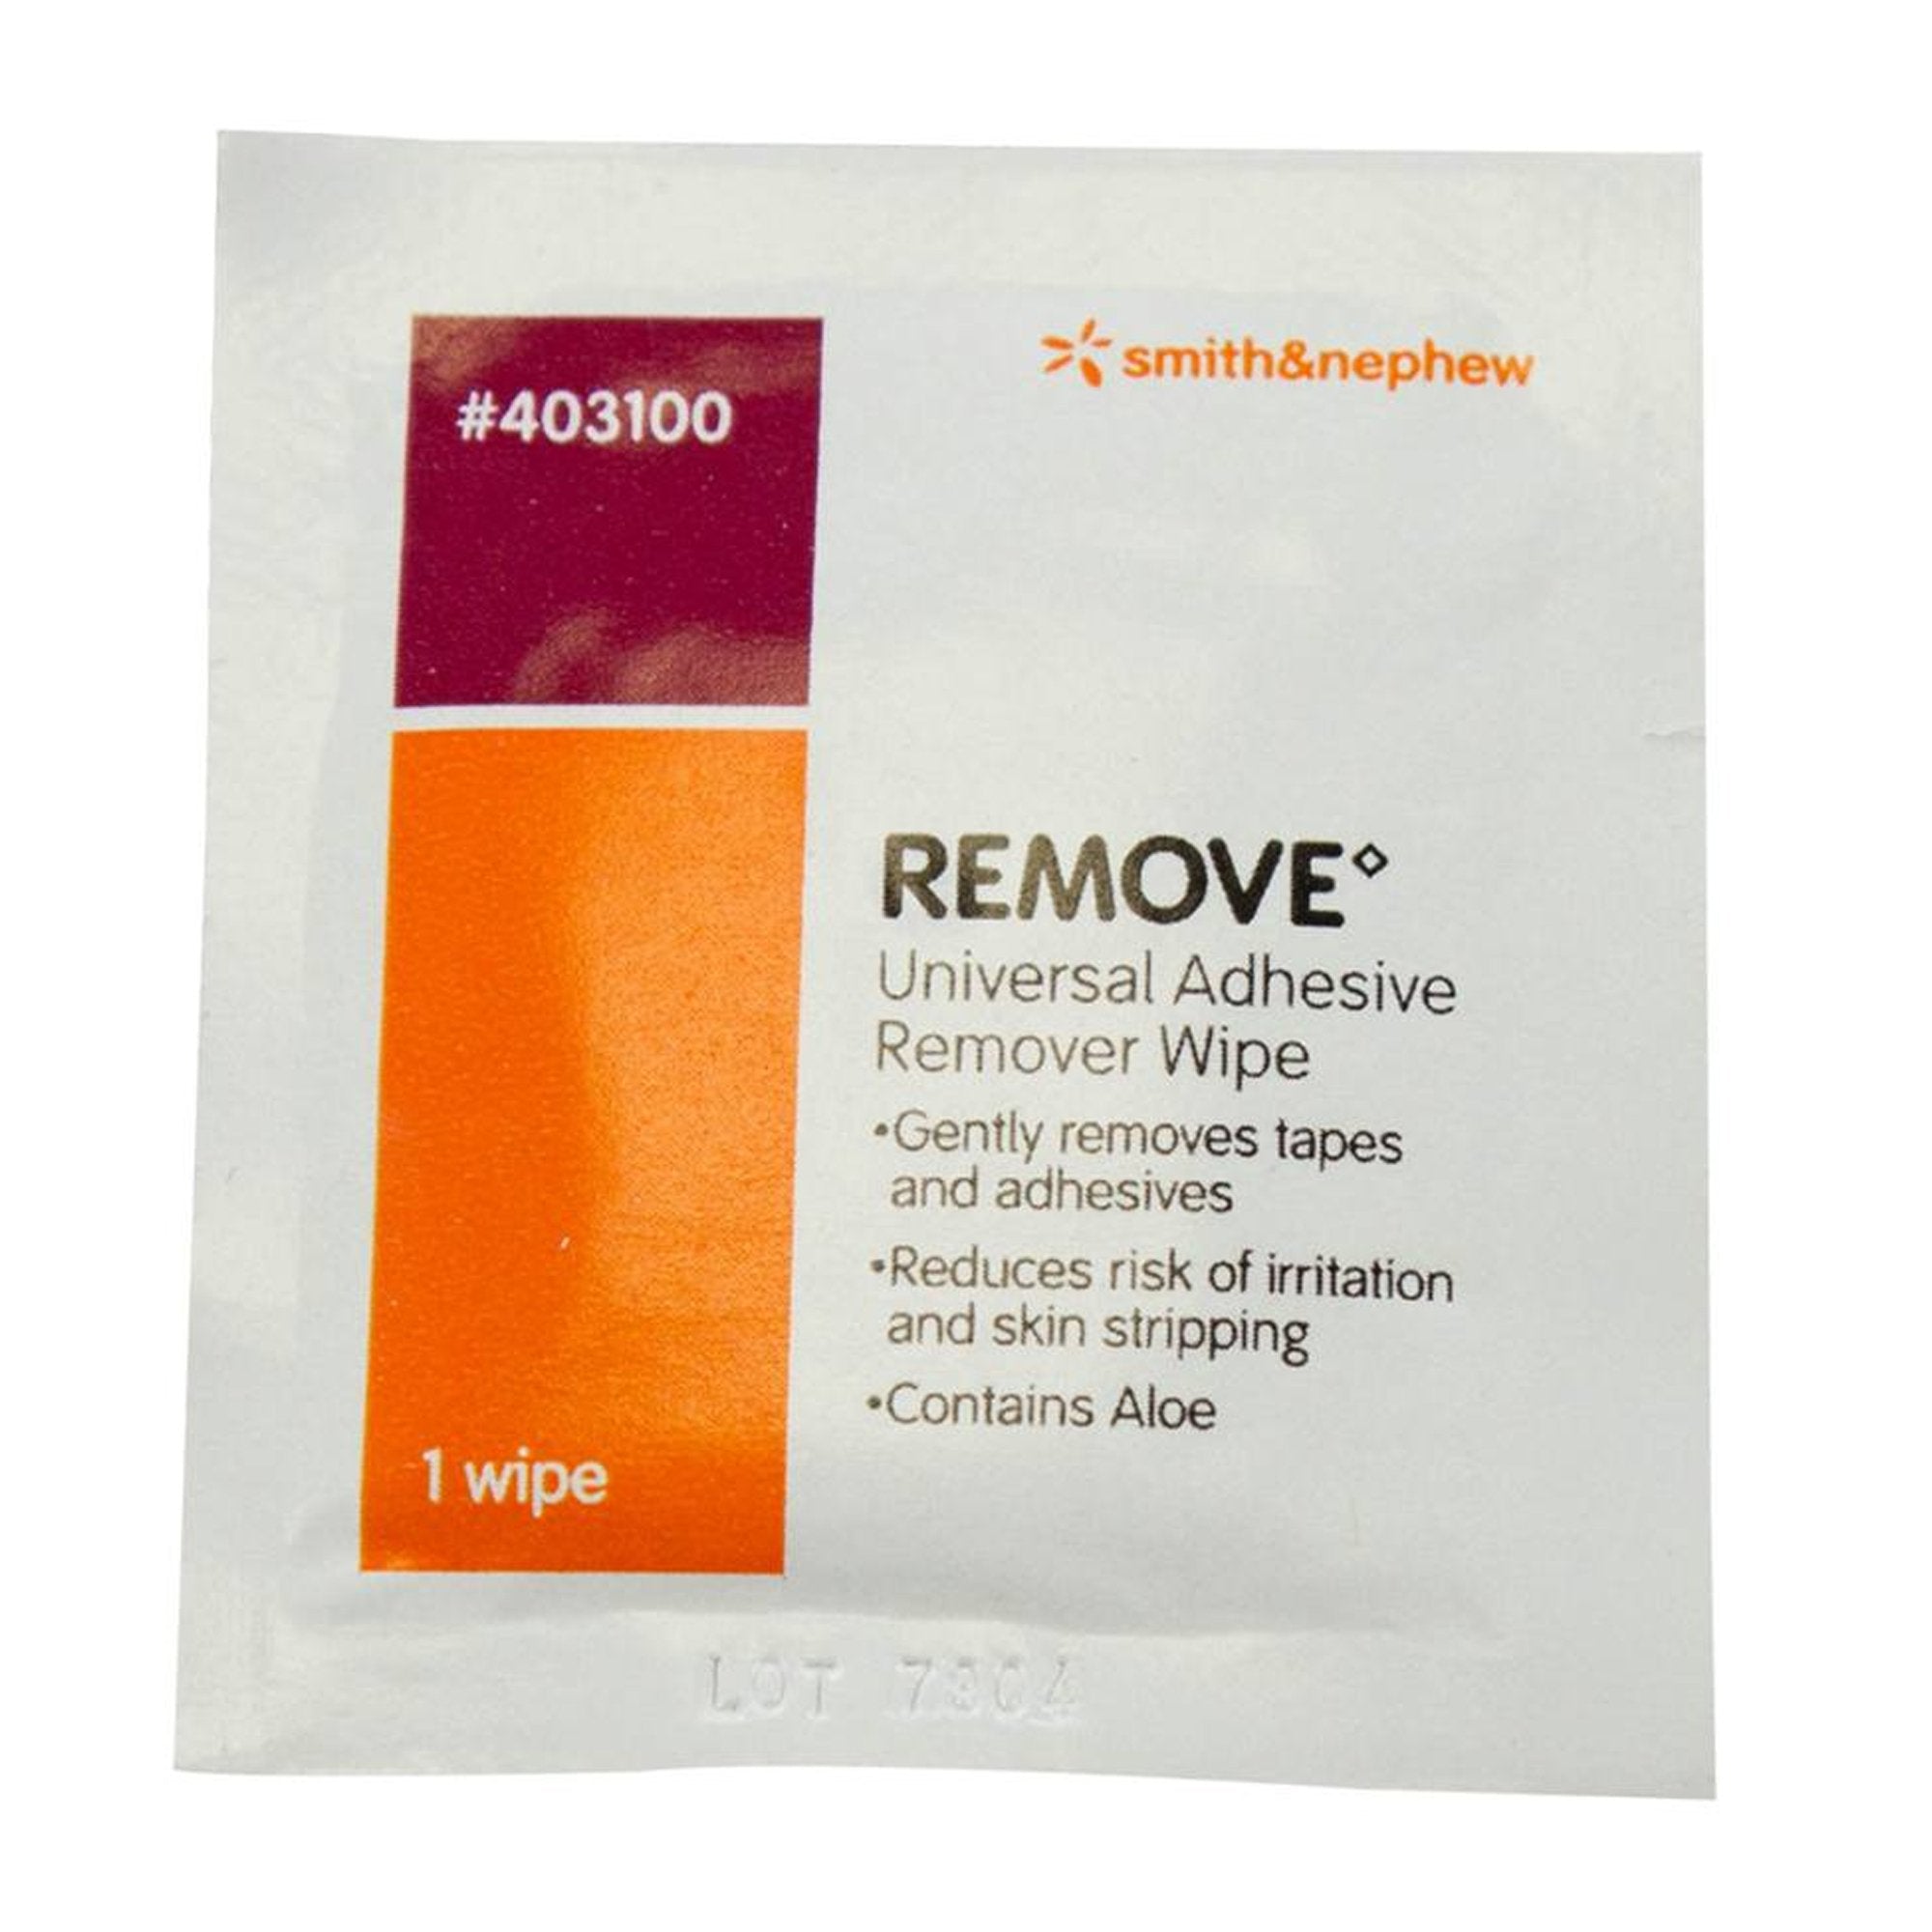 New Sting-Less Adhesive Remover Wipes, Bandage Adhesive Remover for Skin, Medical  Adhesive Remover Wipes, Removes Bandages, Medical Tape, & Skin Adhesive  Remover, Stoma Wipes